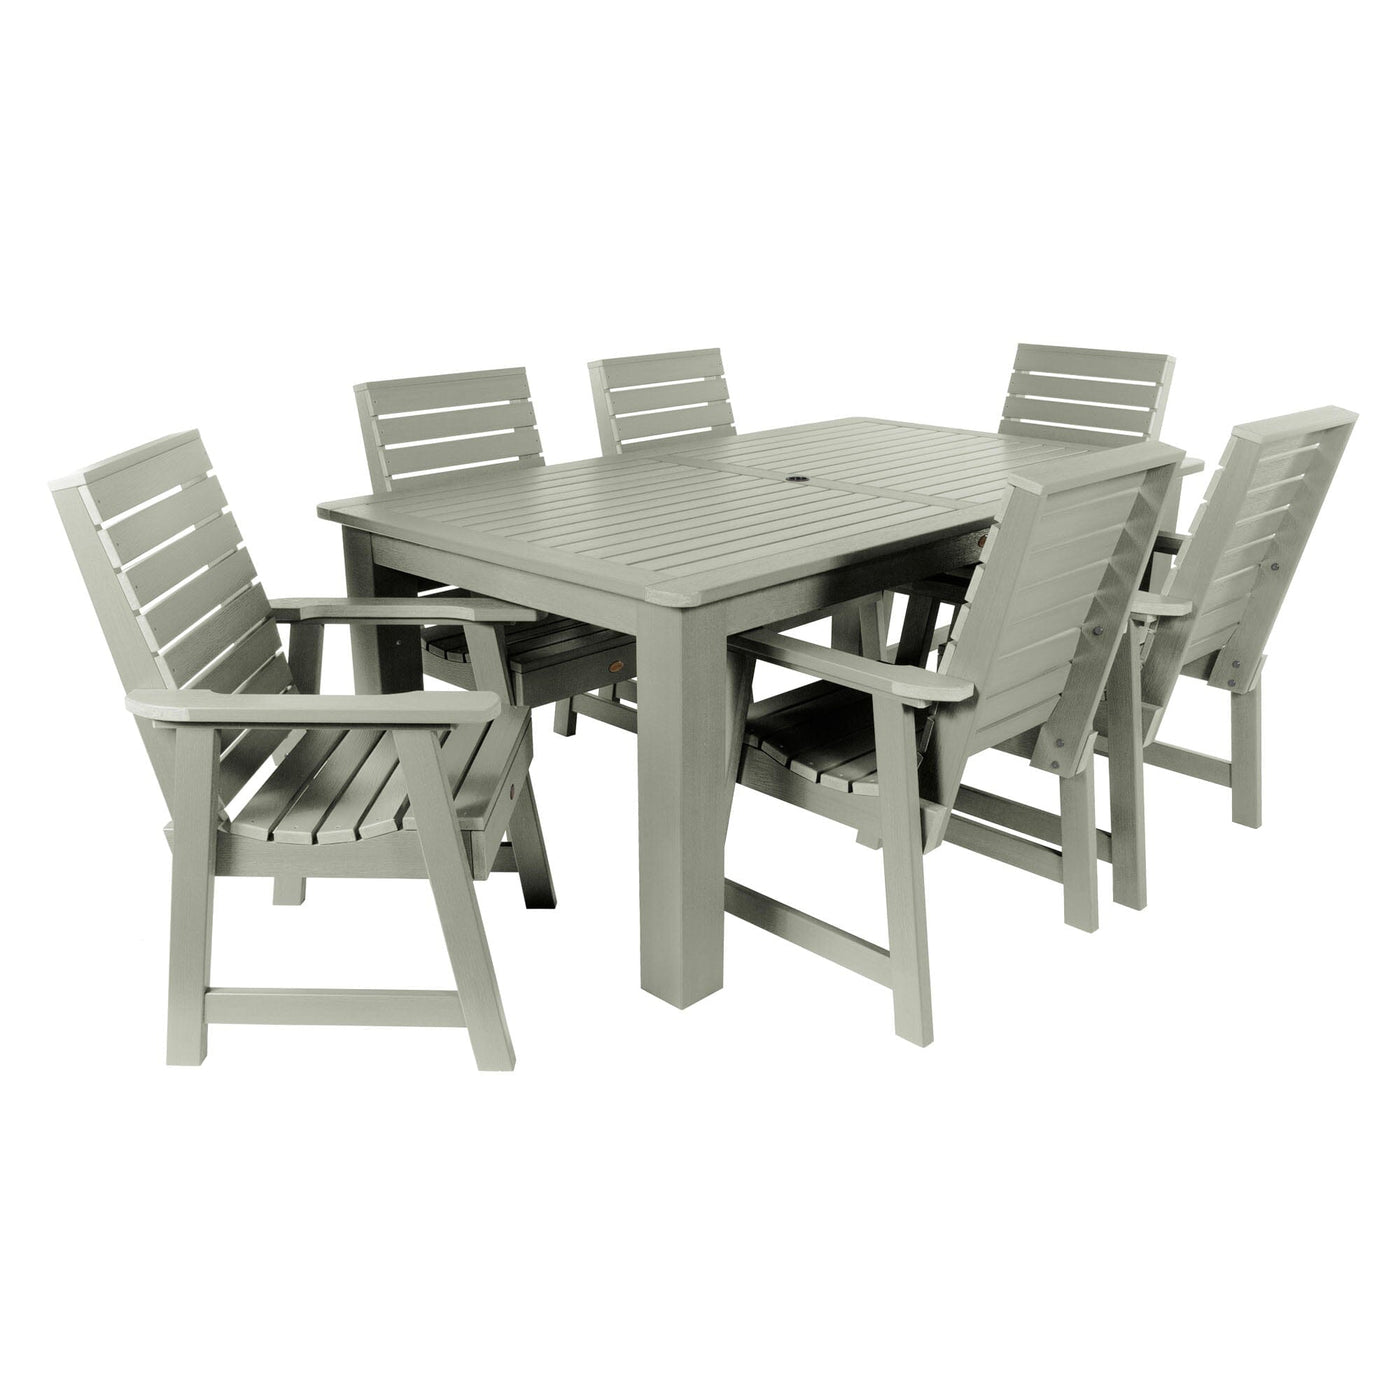 Weatherly 7pc Rectangular Dining Set 42in x 72in - Dining Height Dining Highwood USA Eucalyptus 